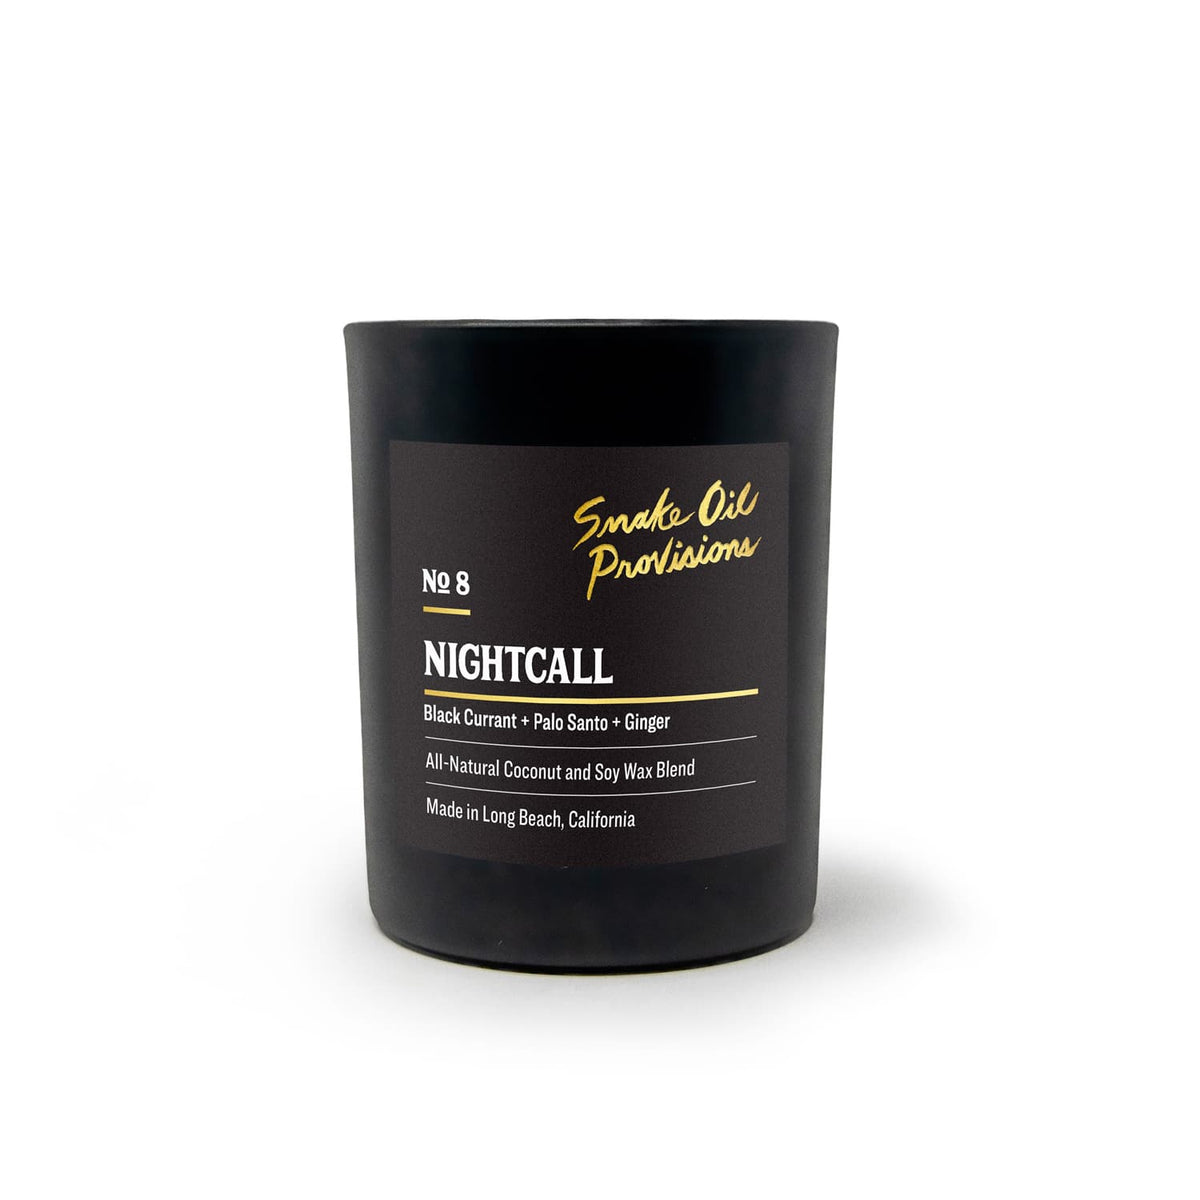 Snake Oil Provisions Nightcall — 7.2 oz Hand Poured Candle